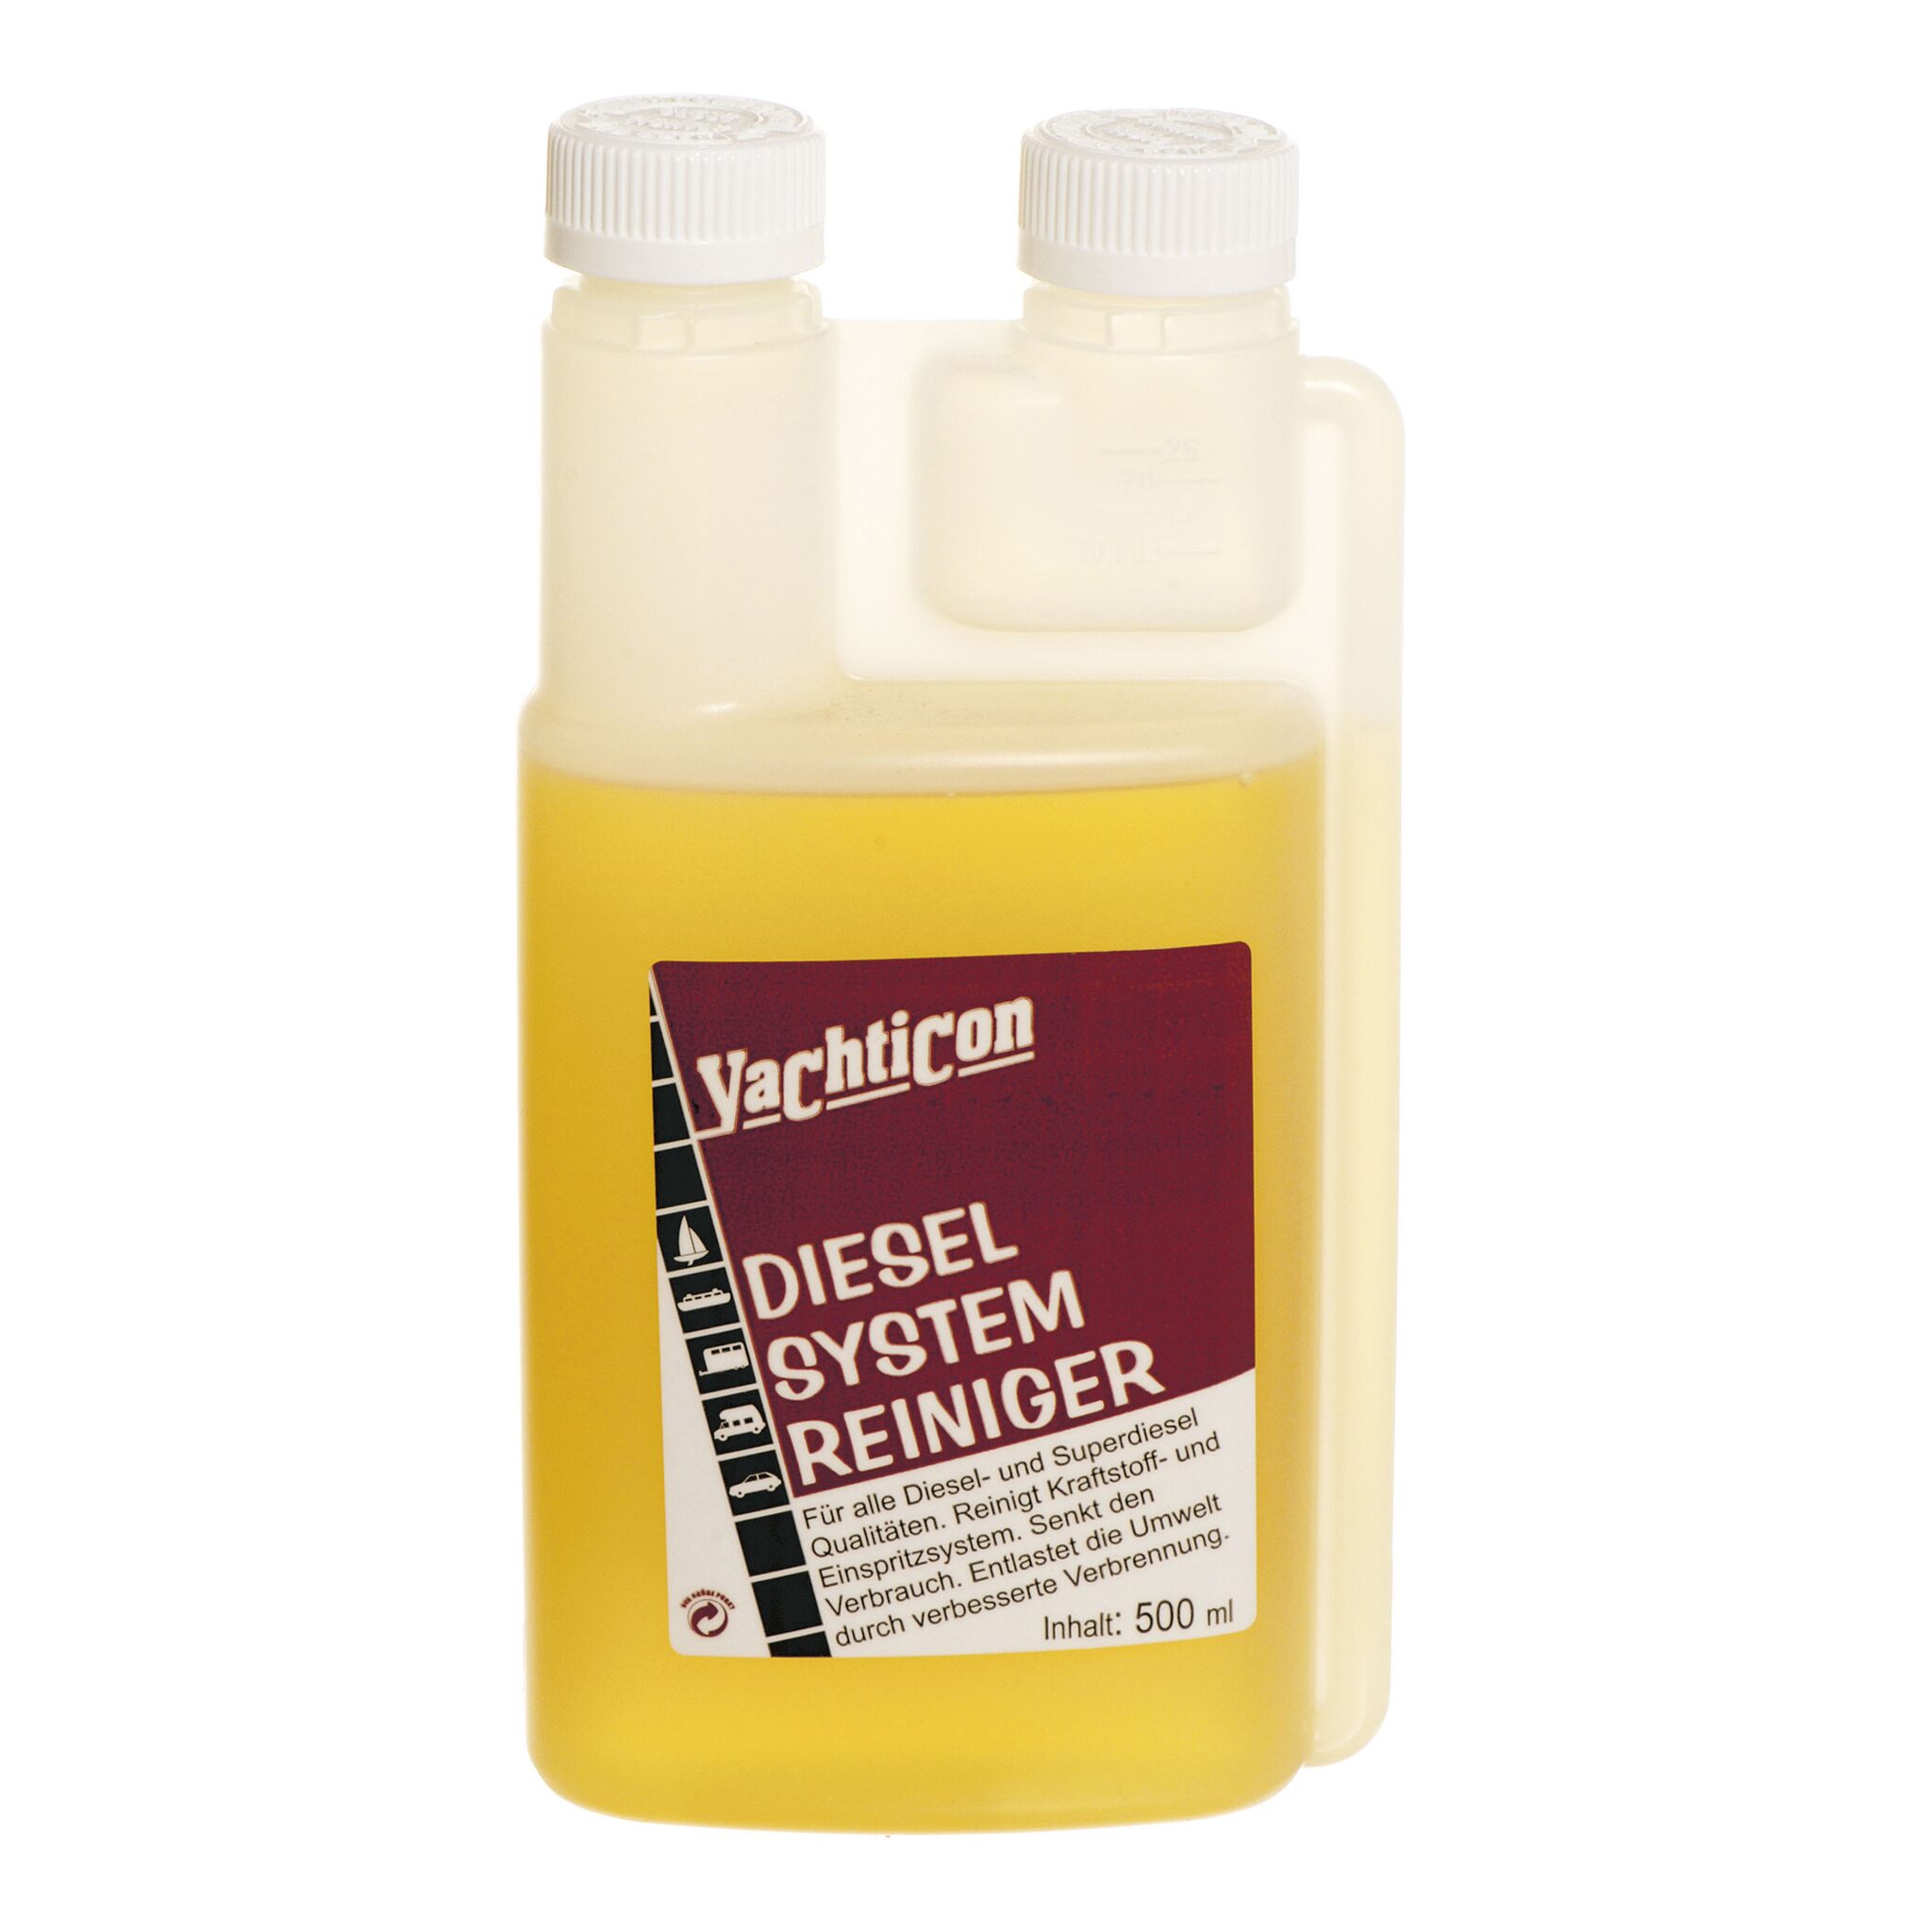 Yachticon Diesel and Gasoline System Cleaner